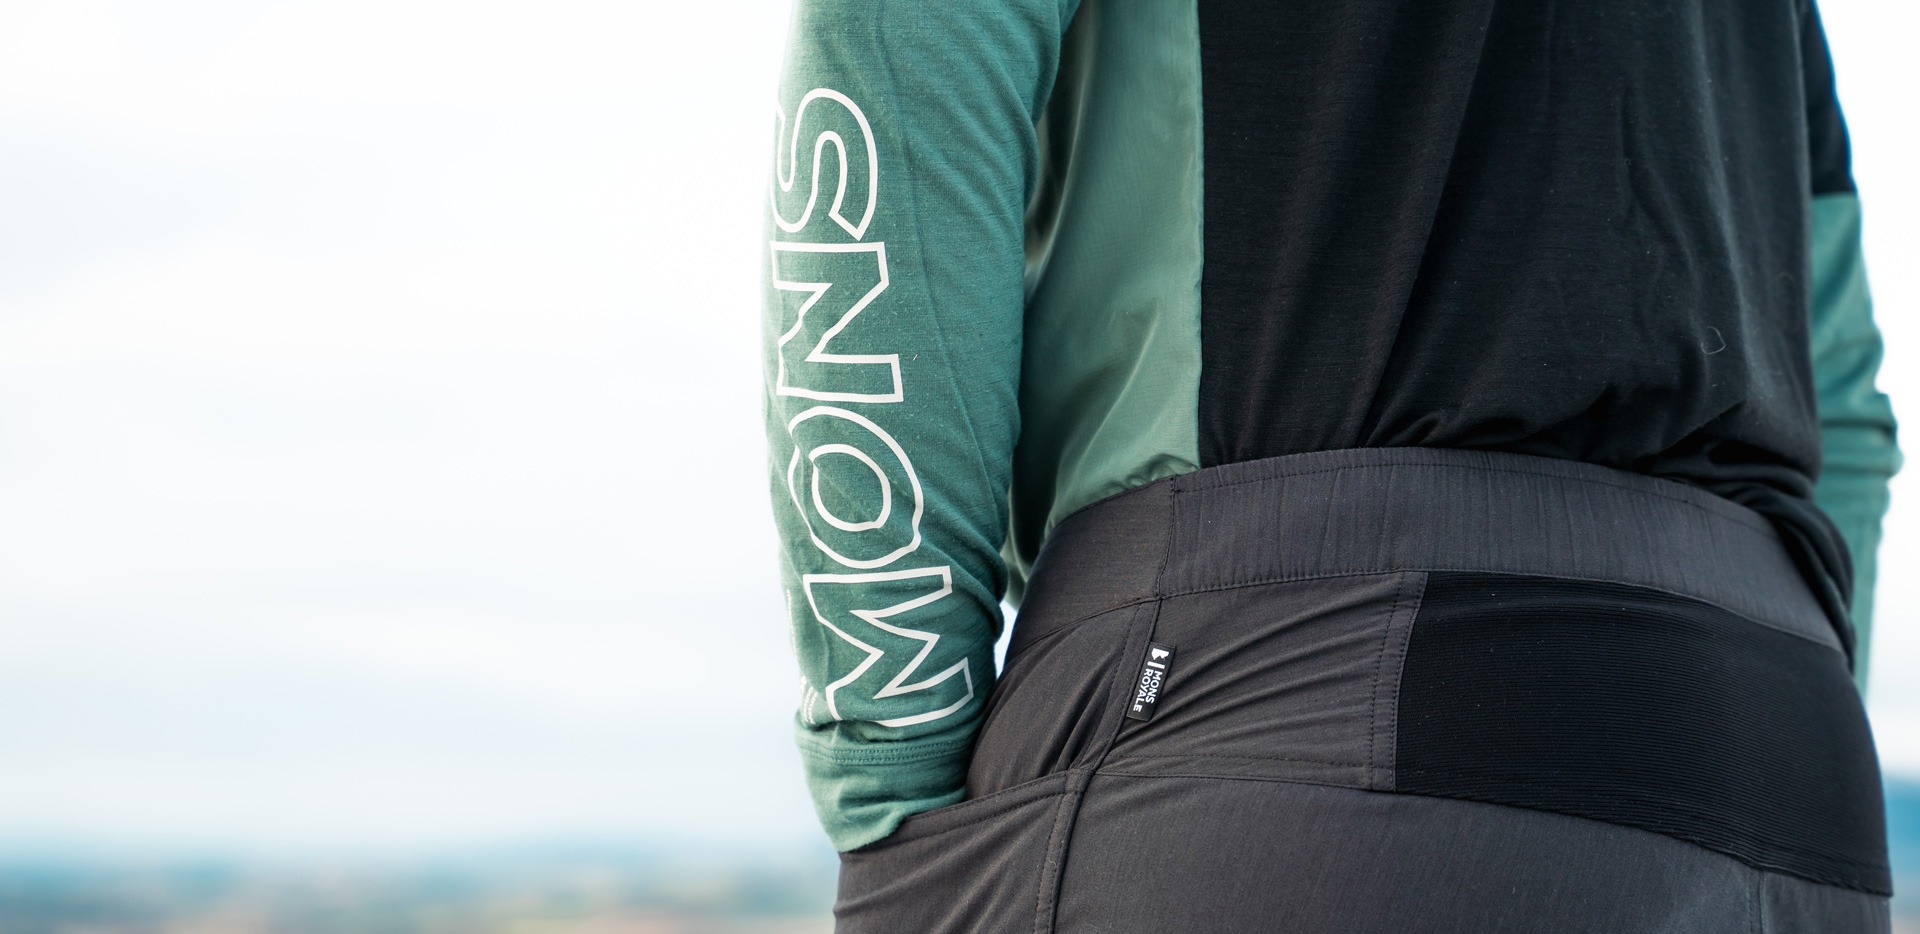 Mons Royale Tarn Merino Shift Wind Jersey and Virage Pants Review